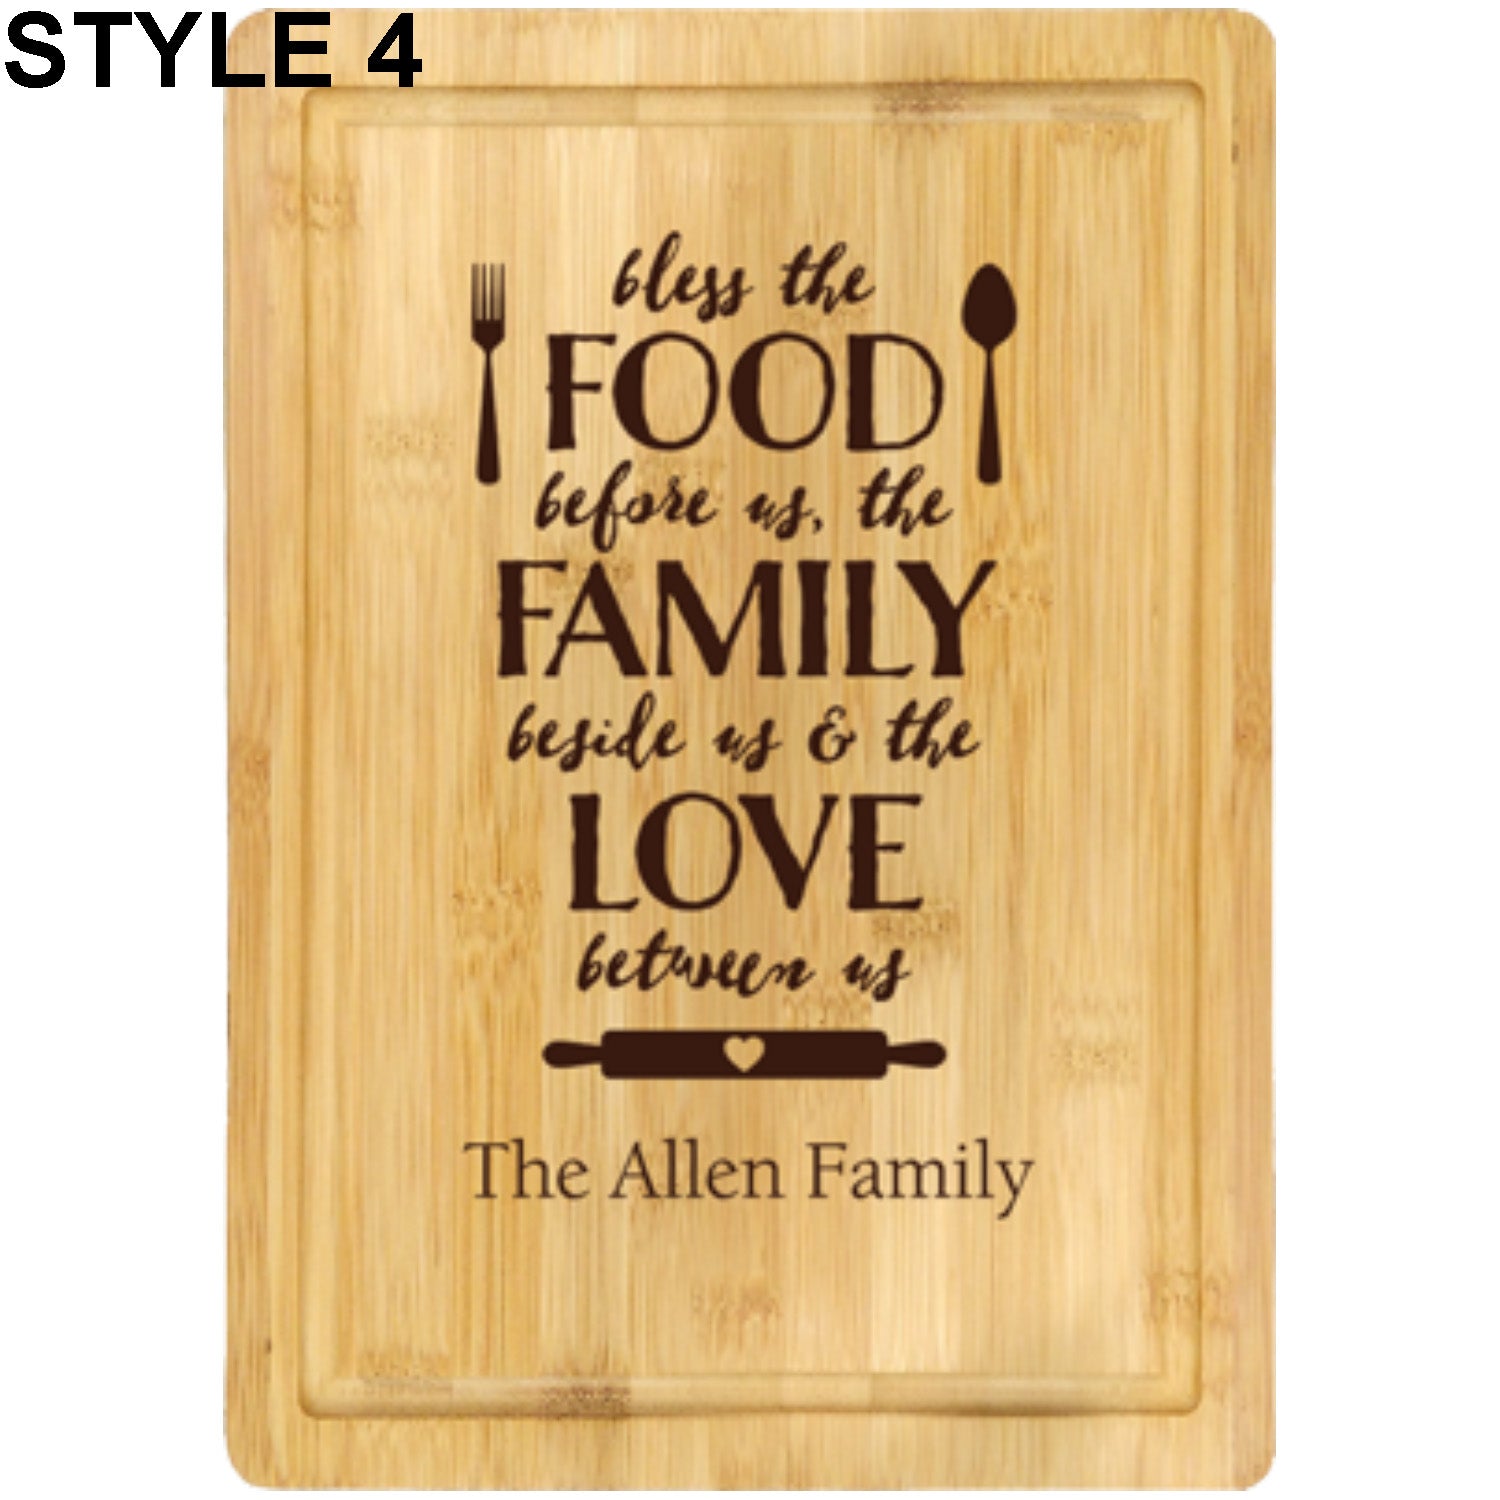 BAMBOO BLOCK CUTTING BOARD - Engravable (ZNHC0036) - Southern Grace Creations